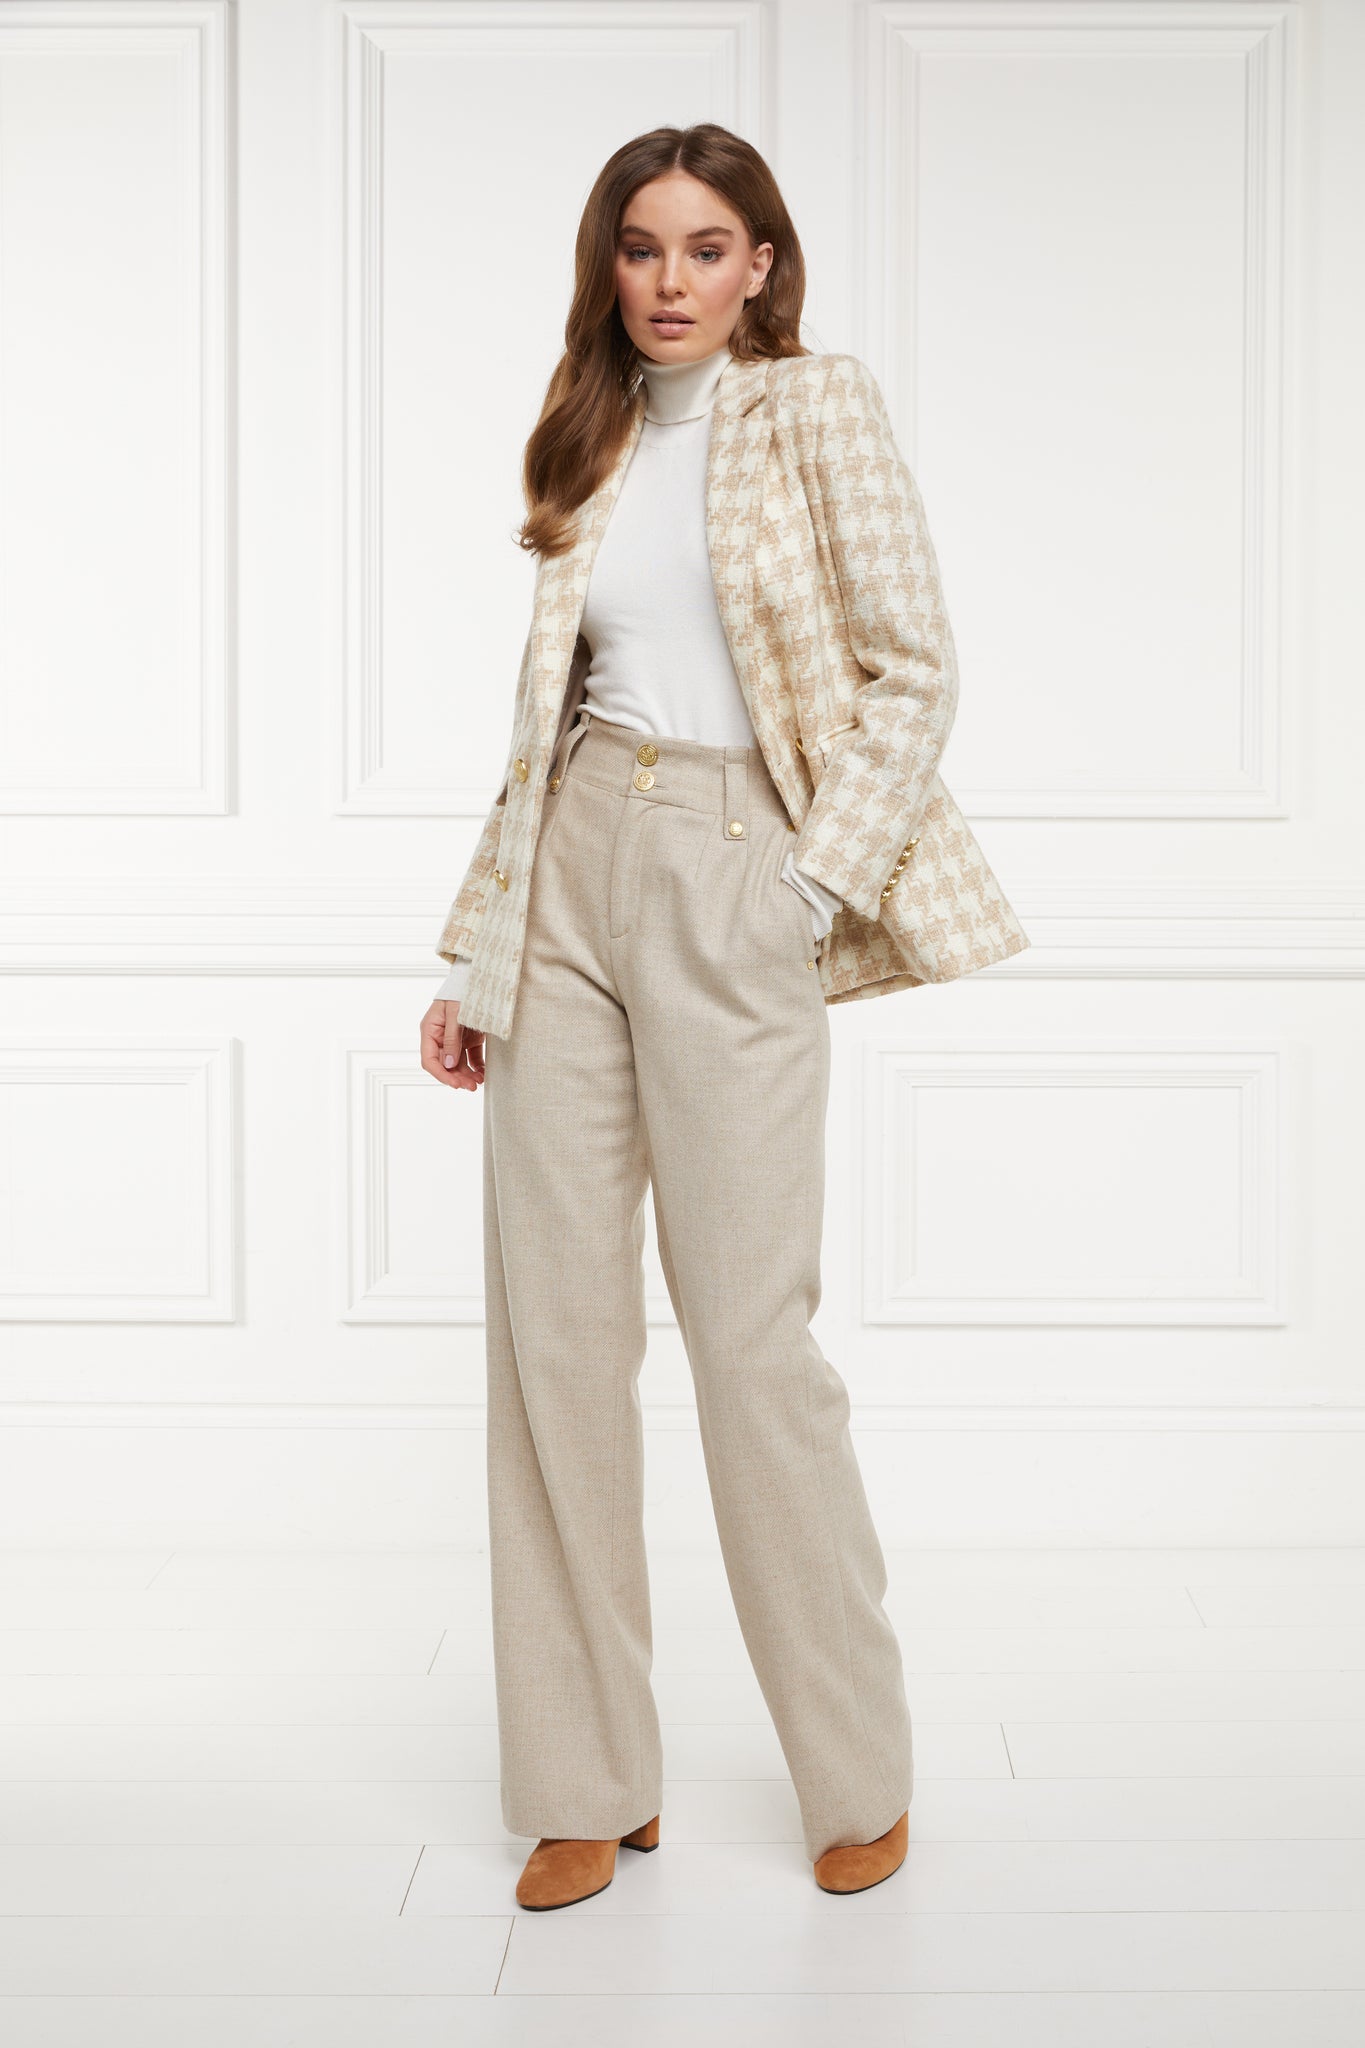 double breasted wool blazer in white and camel houndstooth with two hip pockets and gold button details down front and on cuffs and handmade in the uk worn with white roll neck and beige tailored trousers